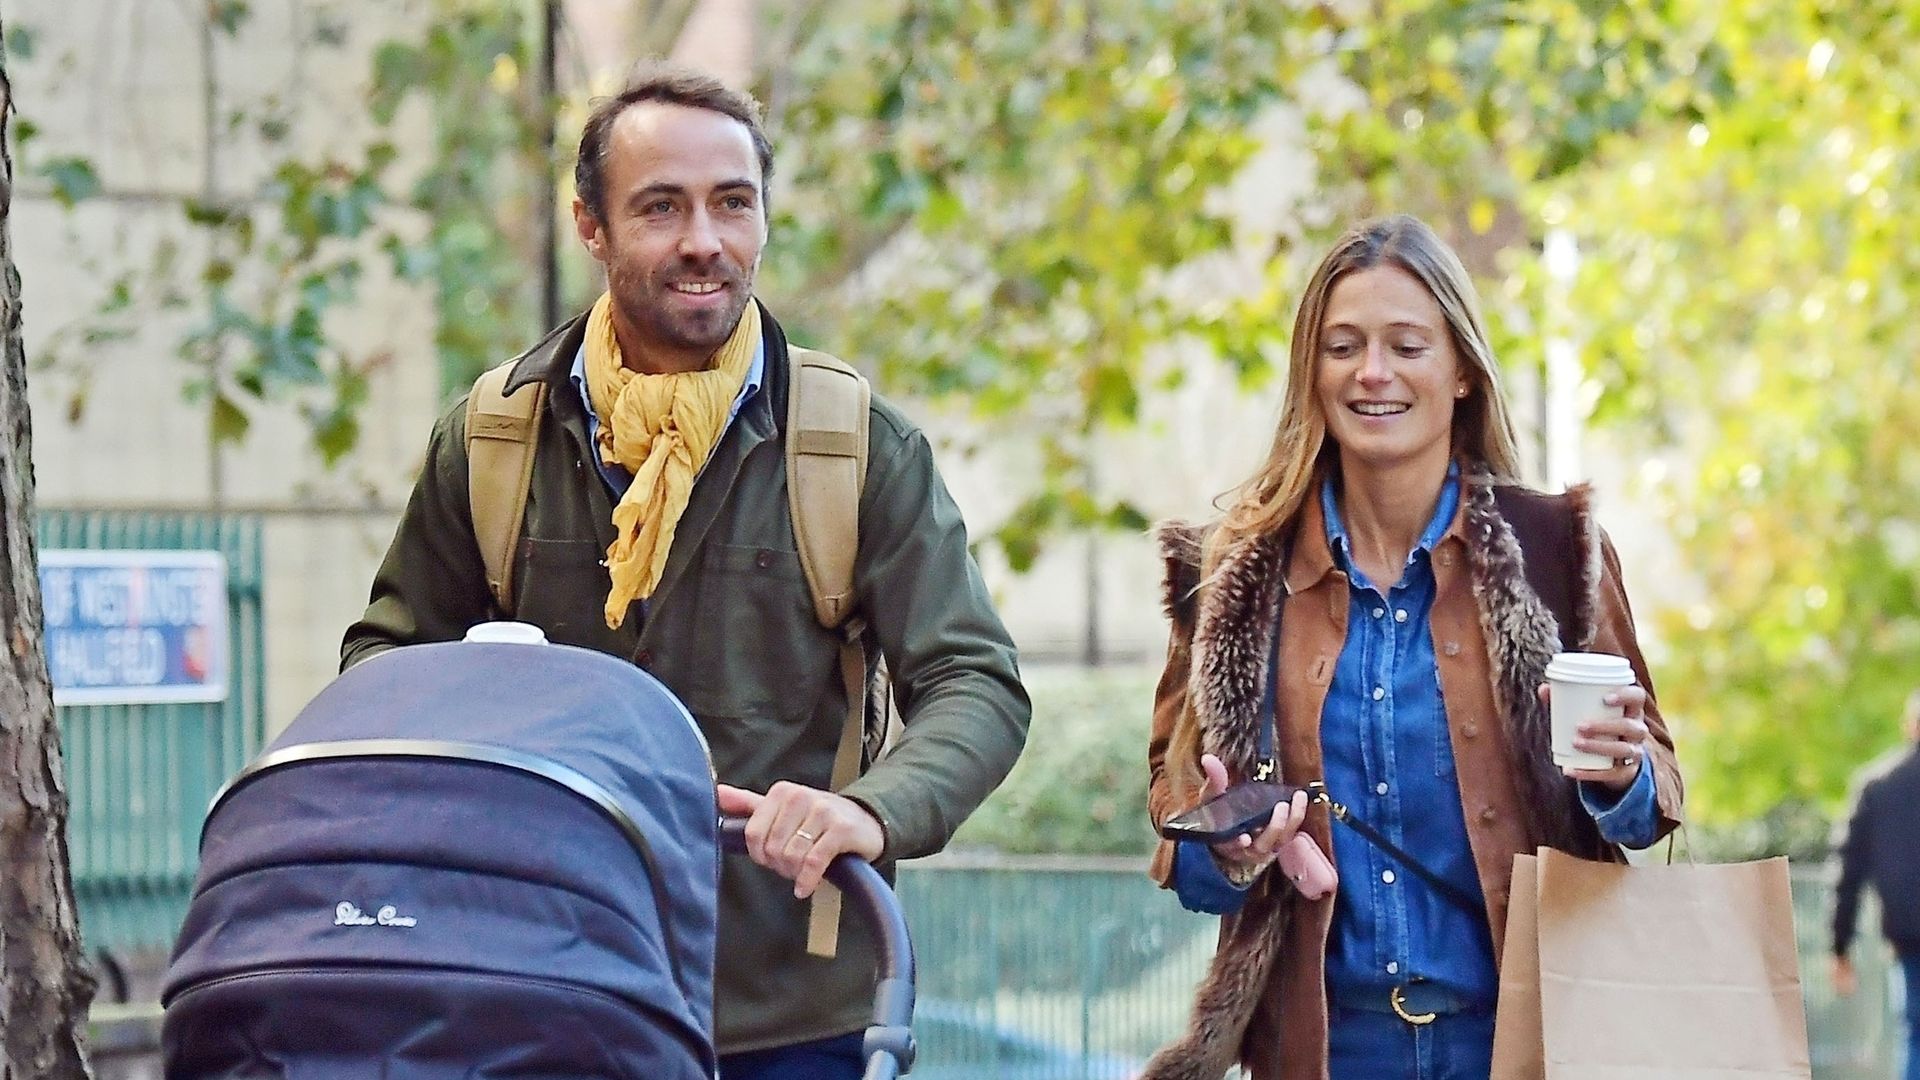 James Middleton and Alizee talk while walking with new baby